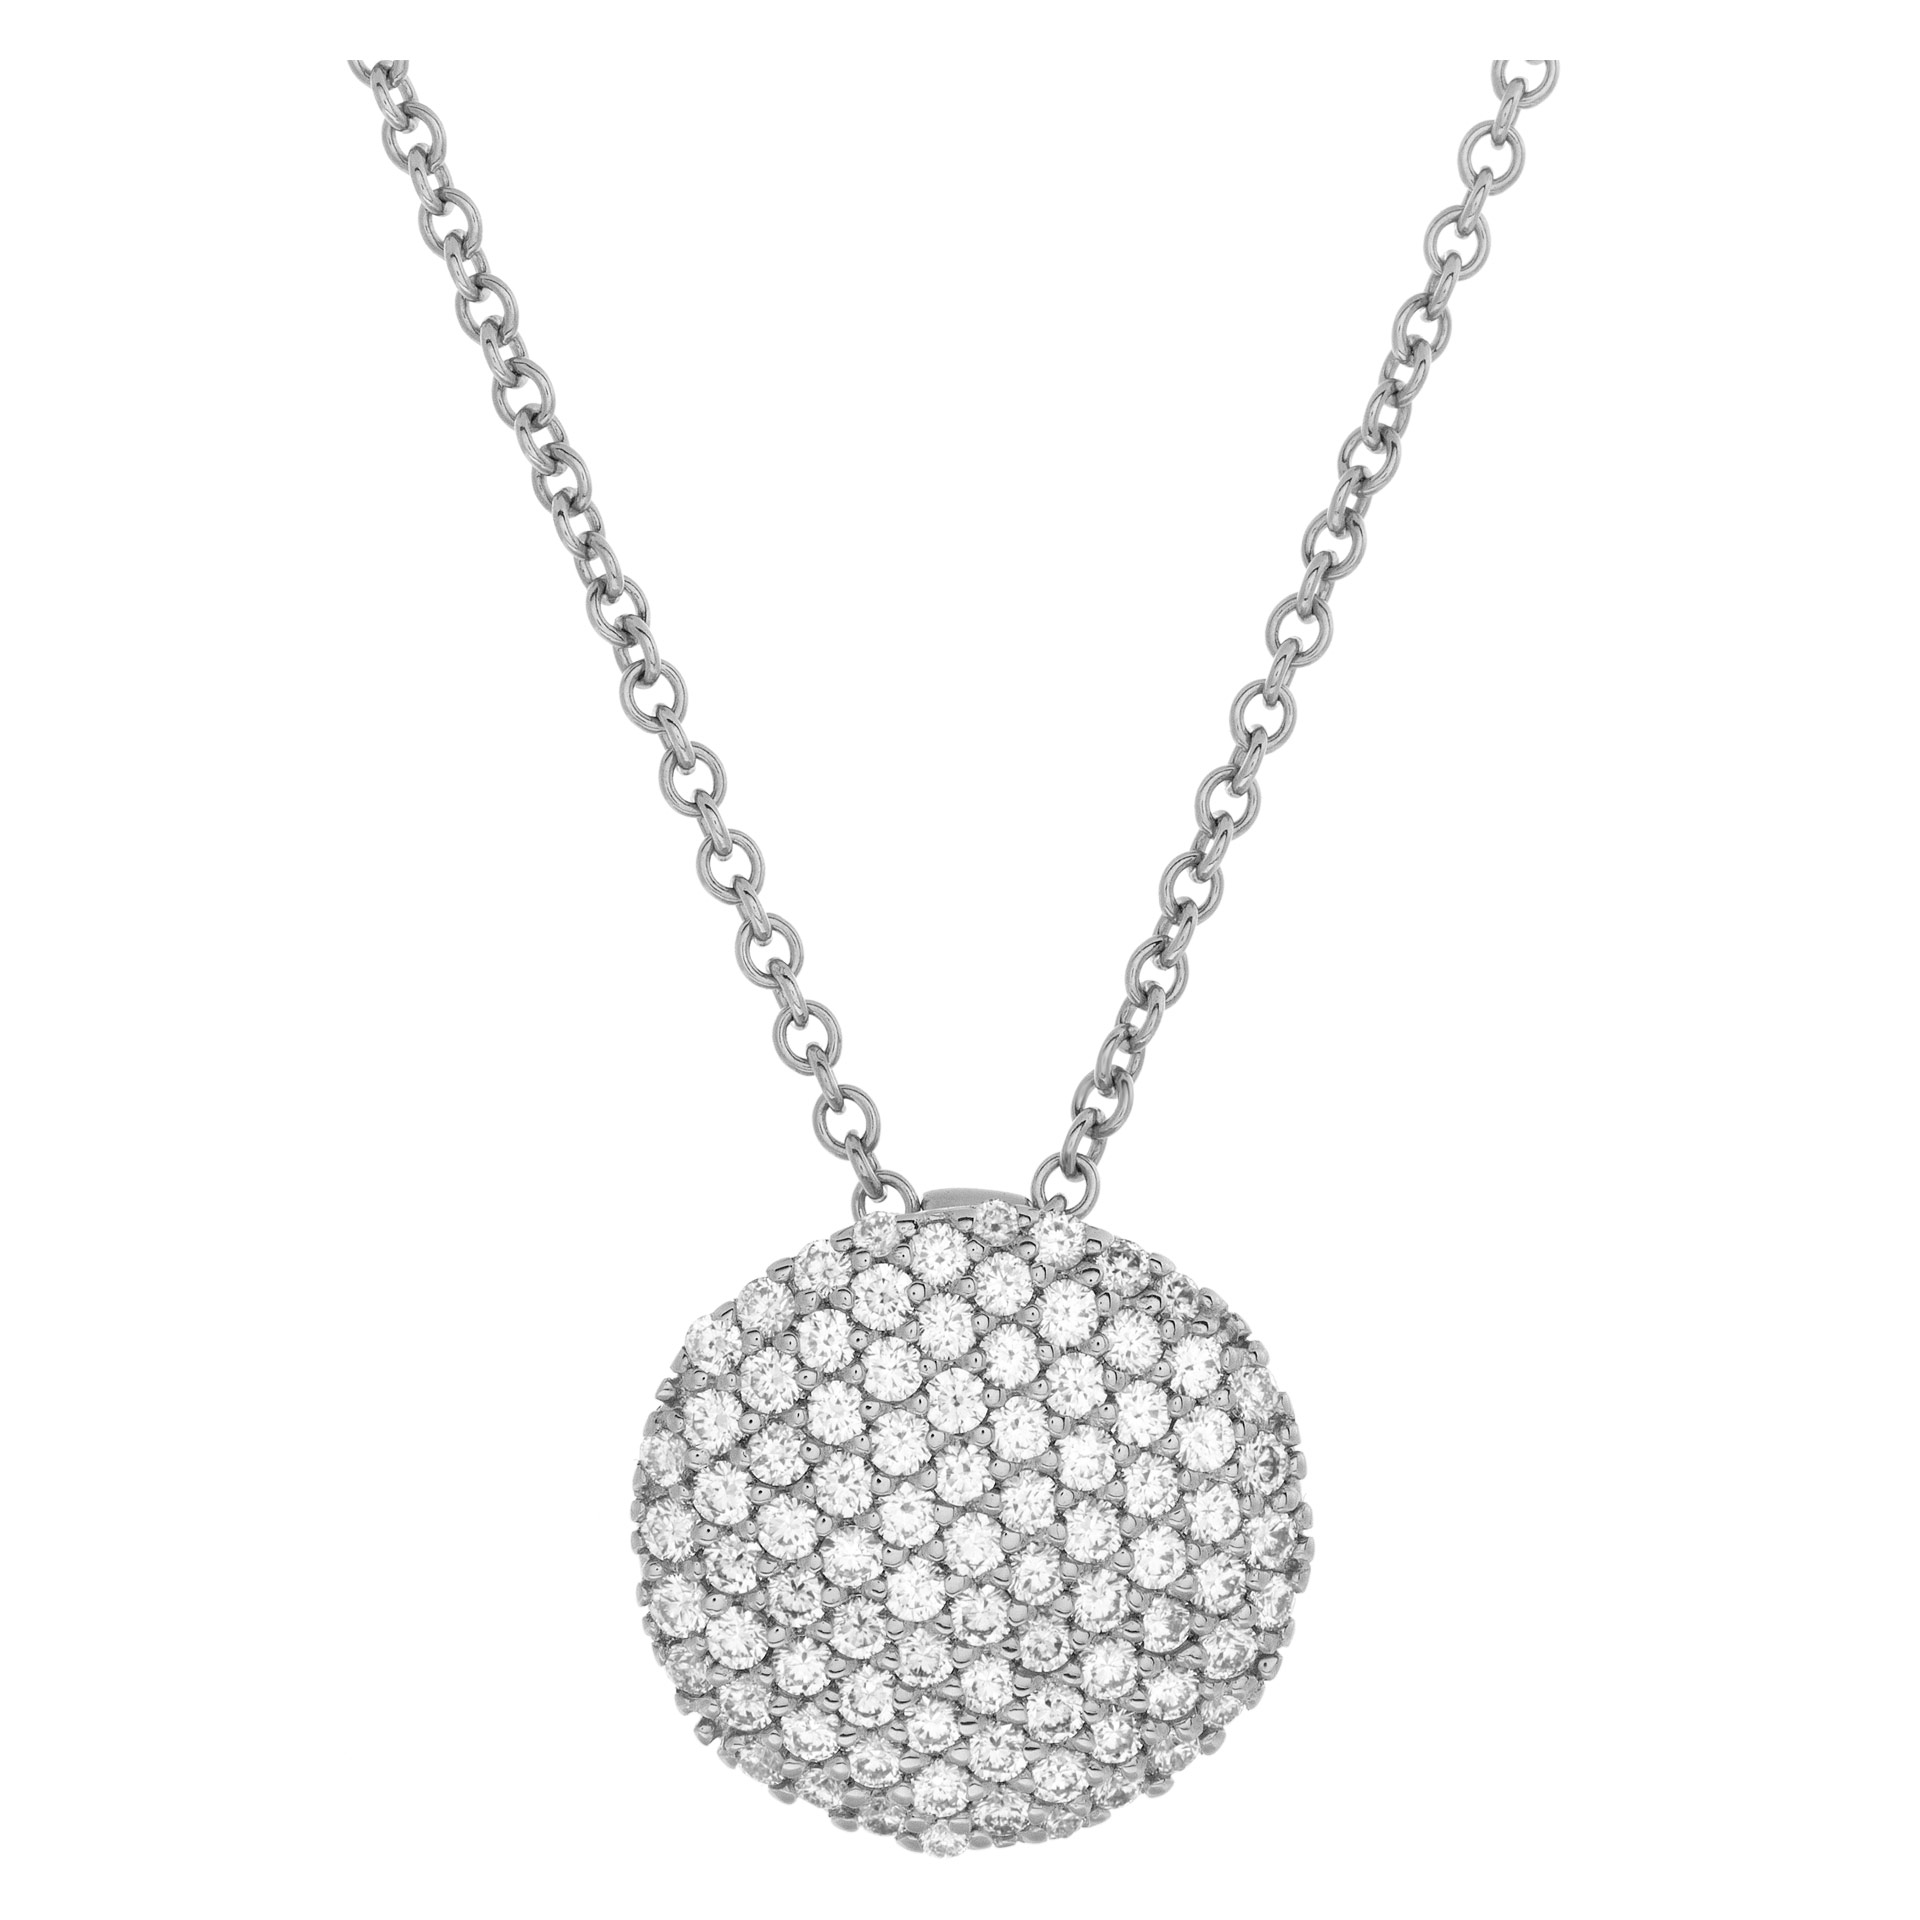 Pave diamond pendant in 18k white gold on 18k white gold chain necklace